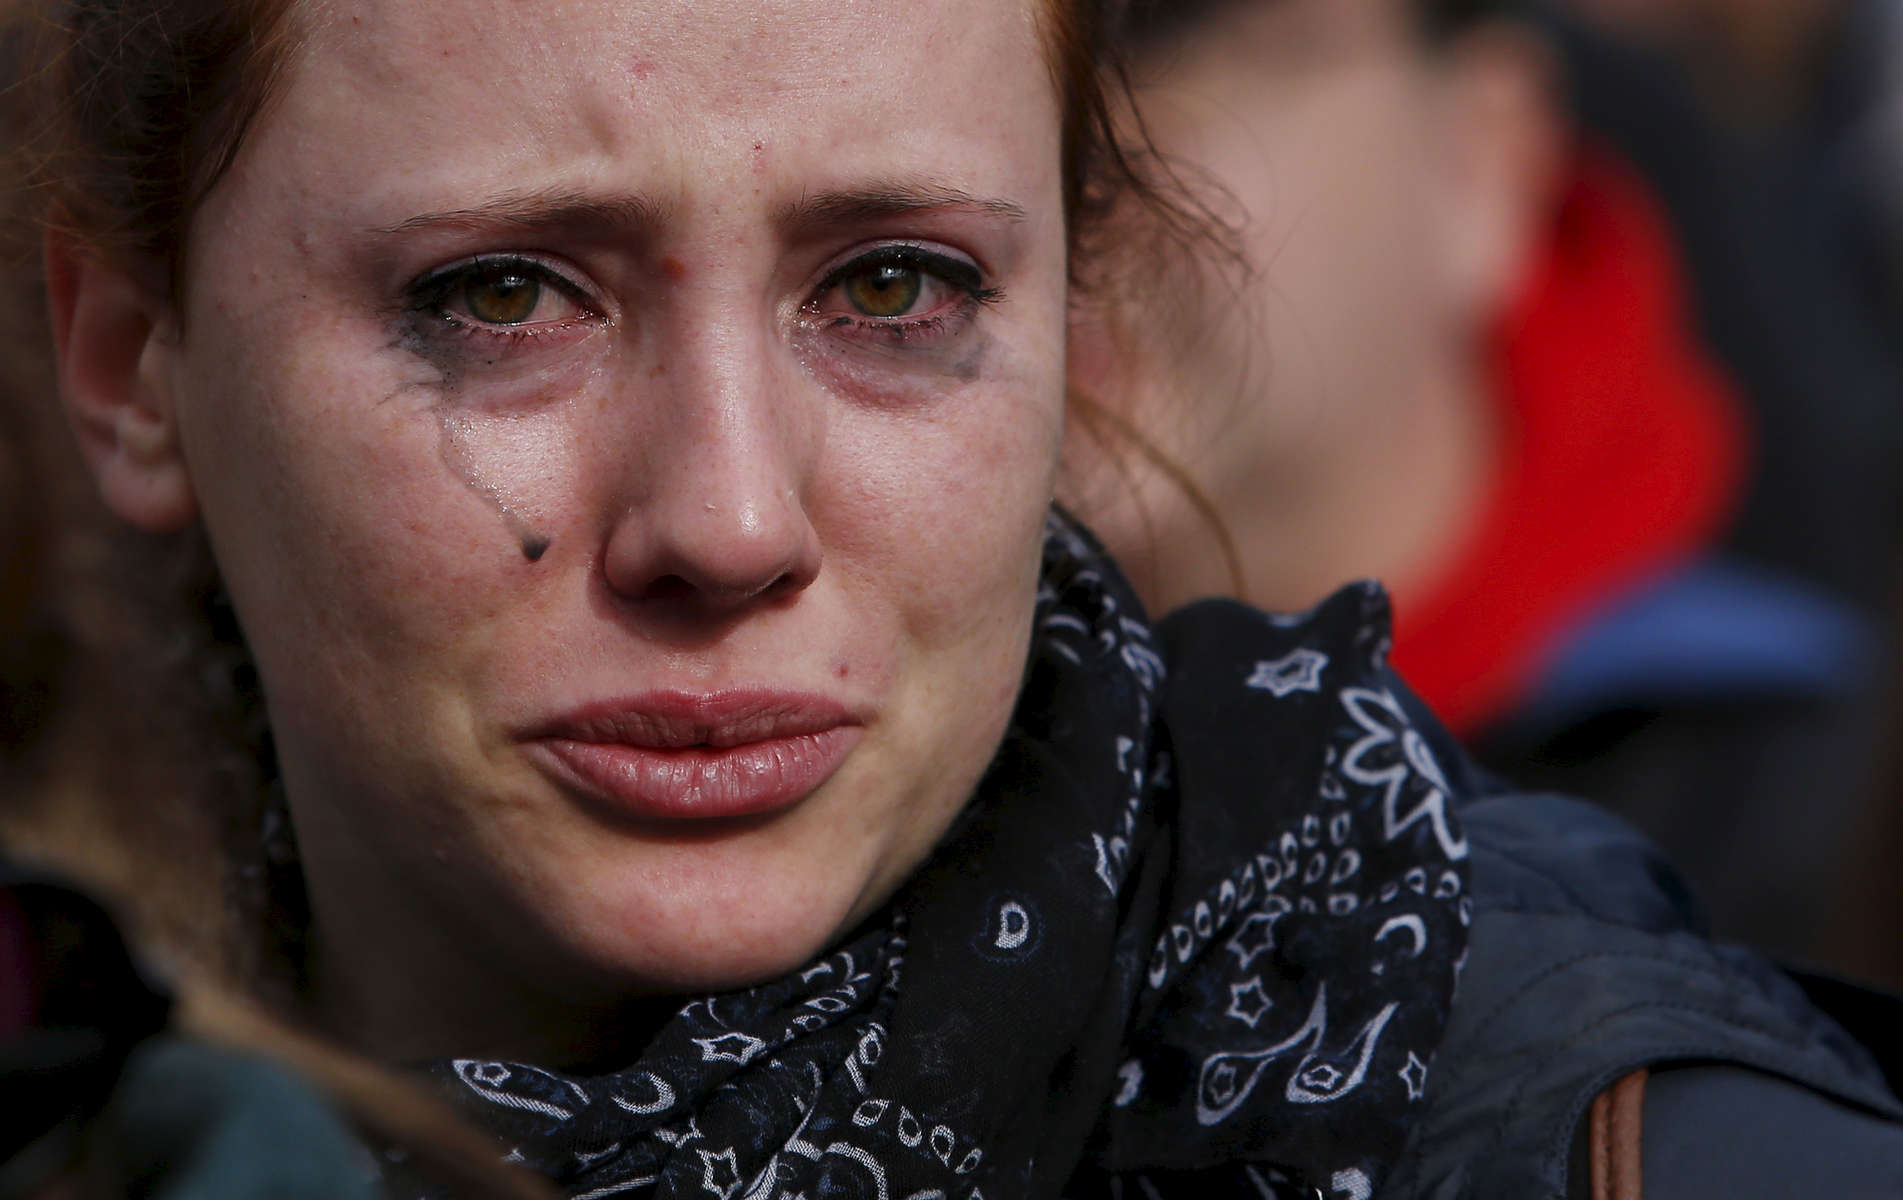 Boston, Massachusetts -- 11/15/2015- Marine Gazan, an au pair from France cries during a rally held on the Boston Common in response to the Paris attacks in Boston, Massachusetts November 15, 2015. 